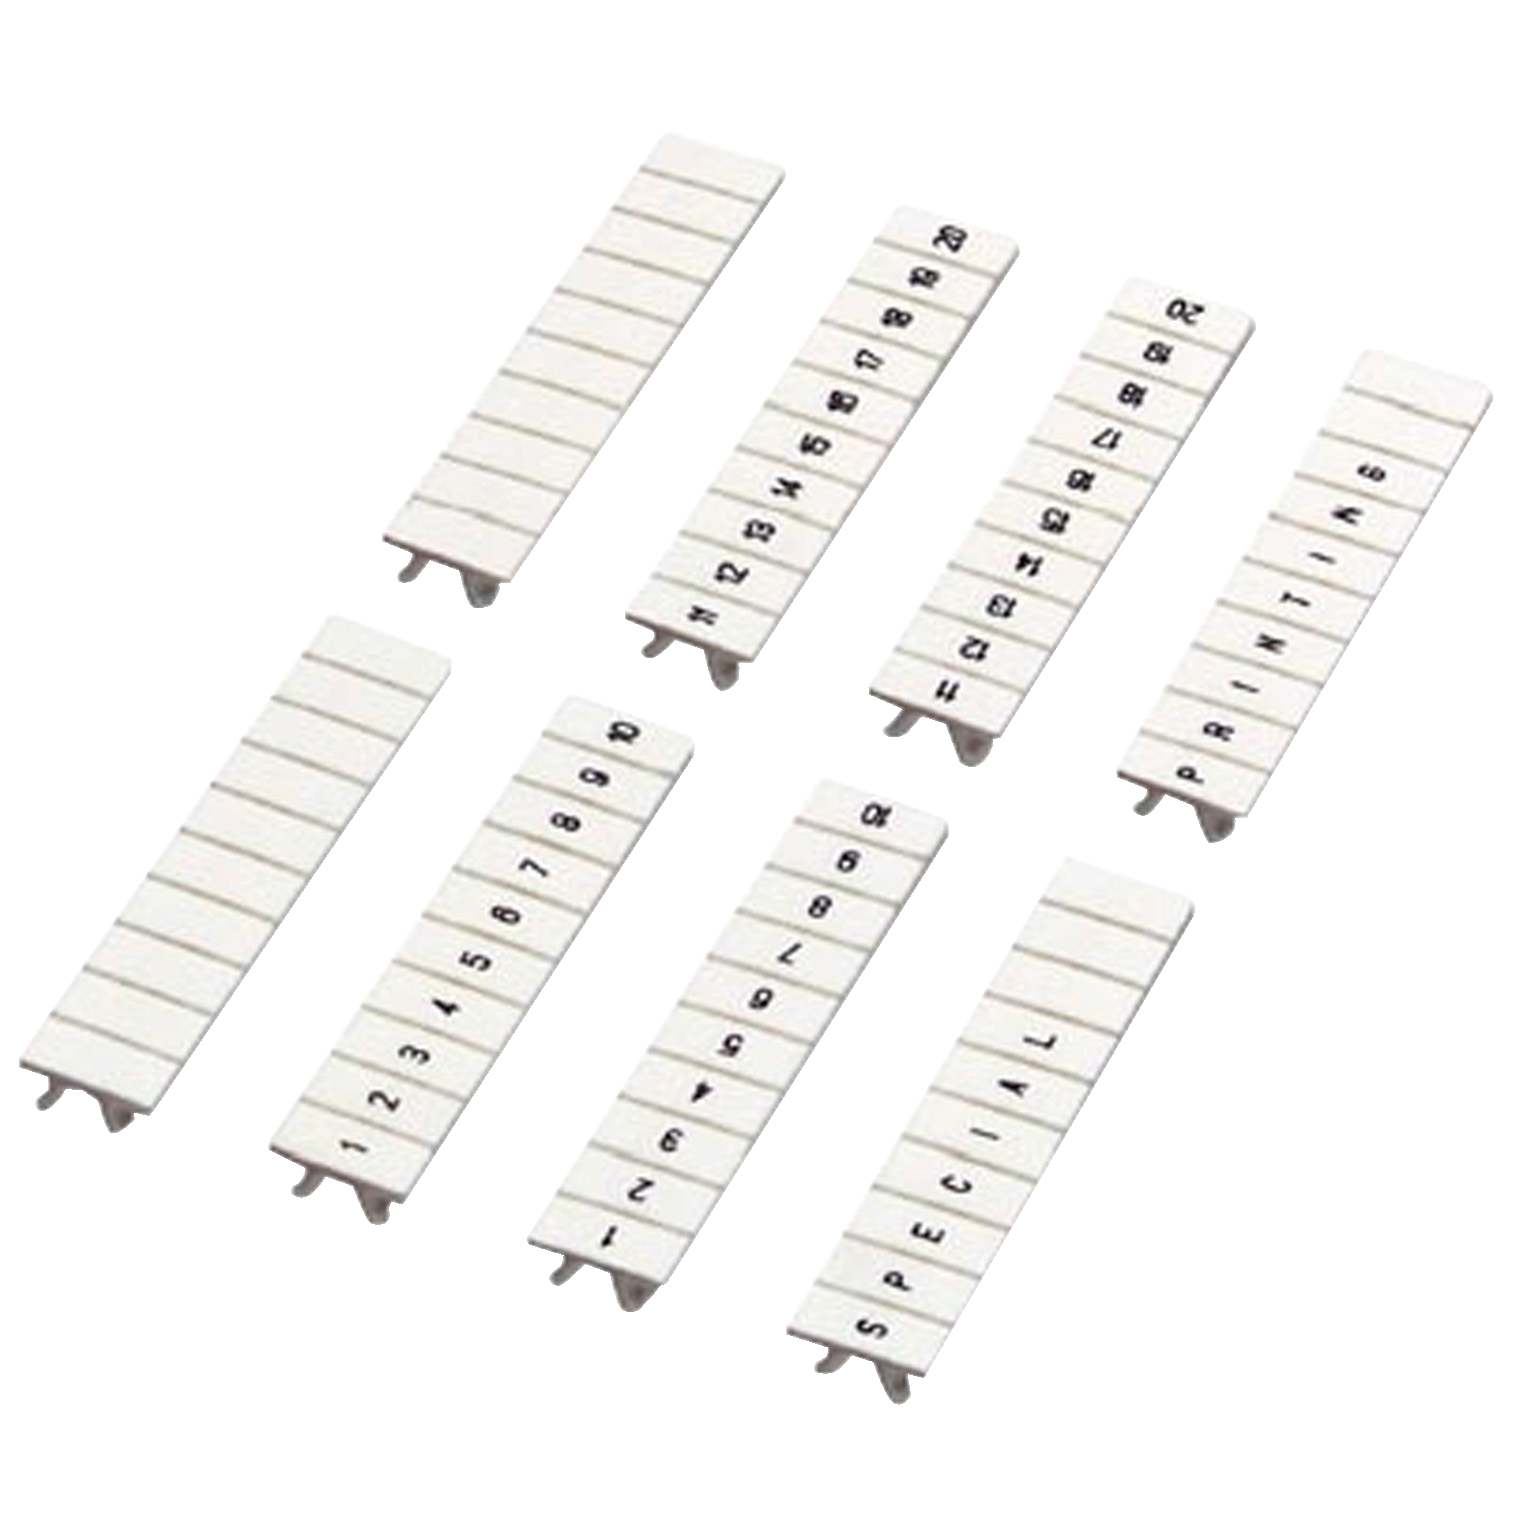 Marking strip, Linergy TR, clip in type, 5mm, characters L1,L2,L3,N,PE, printed horizontal, symbolic, Set of 10